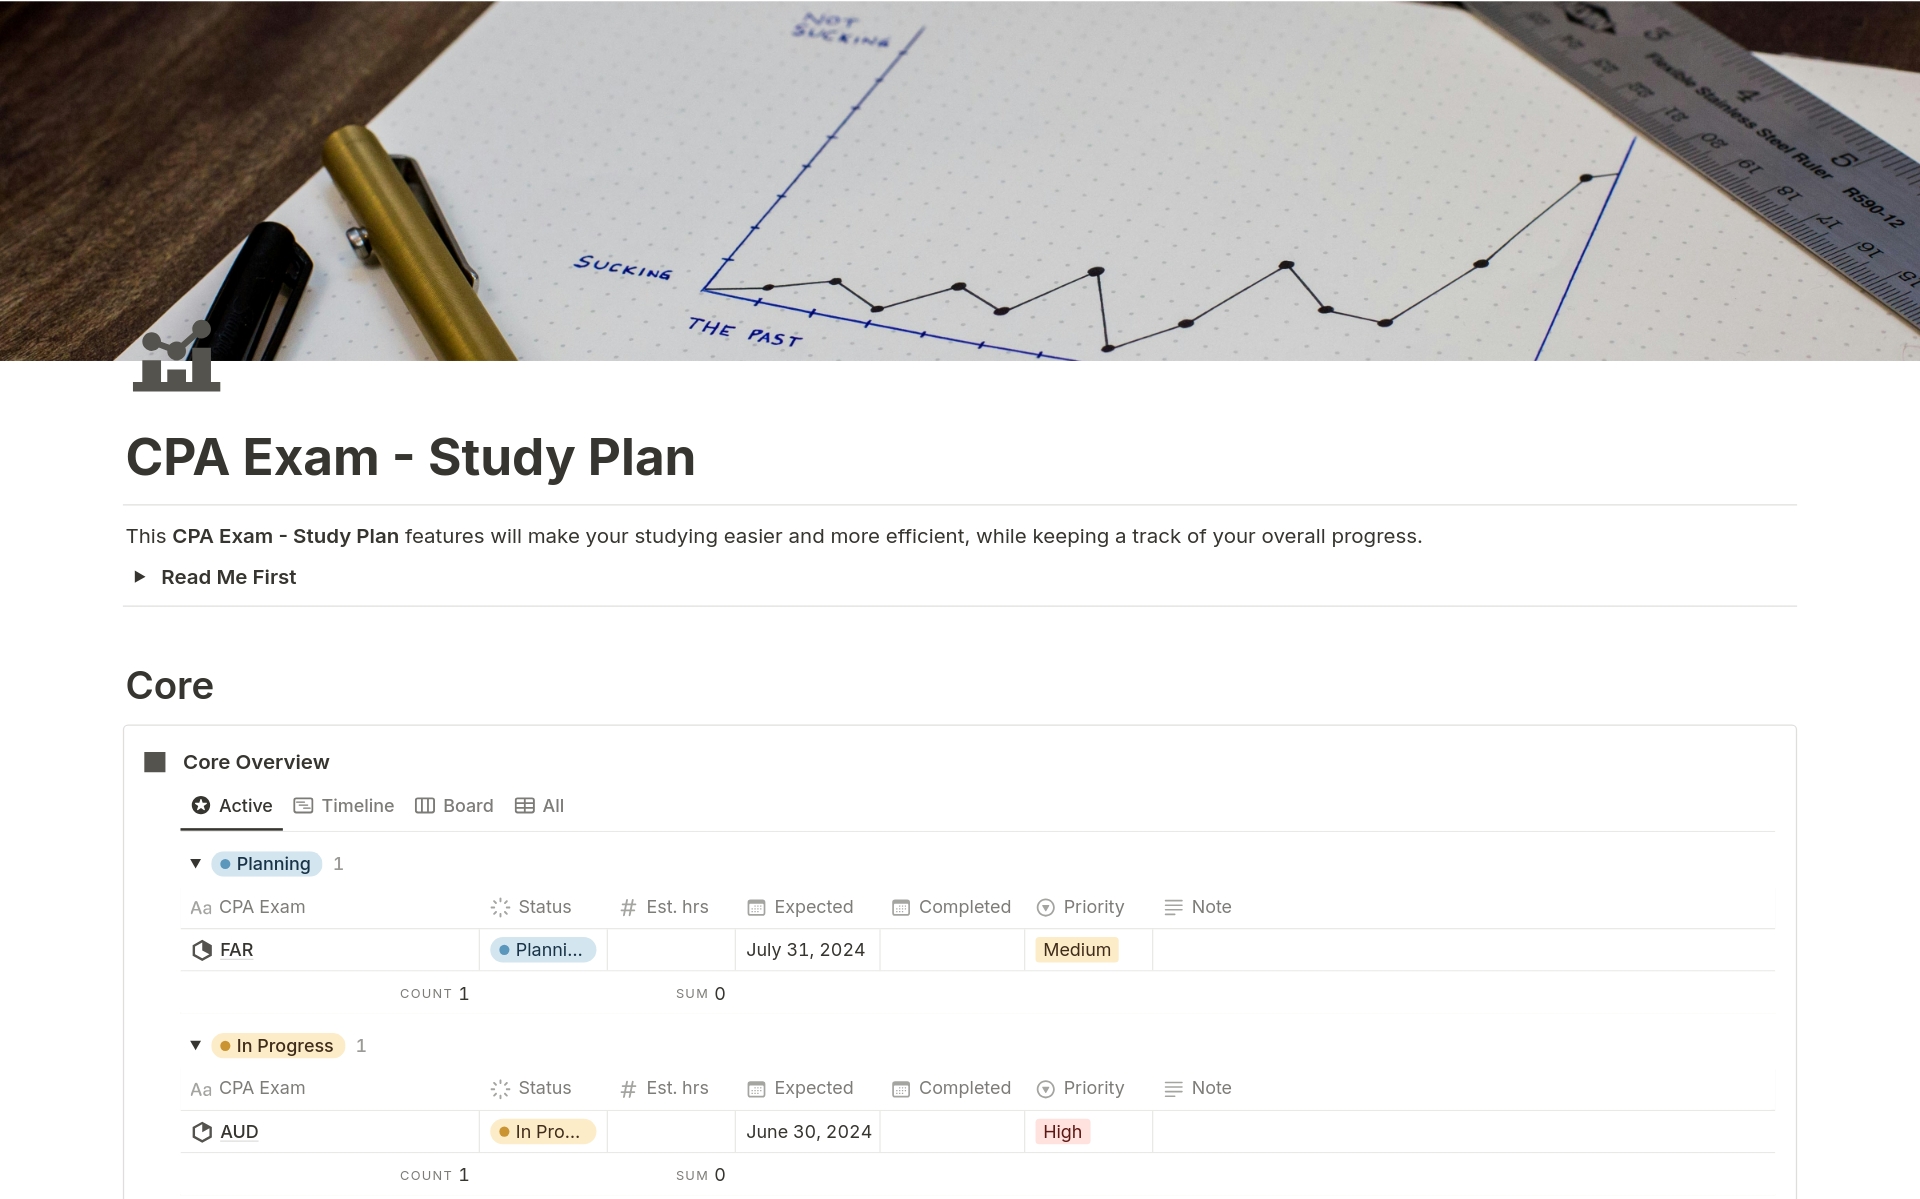 This CPA Exam - Study Plan Notion Template will help to organize your CPA exam preparation while keeping track of your overall progress.
Perfect for accounting professionals!!